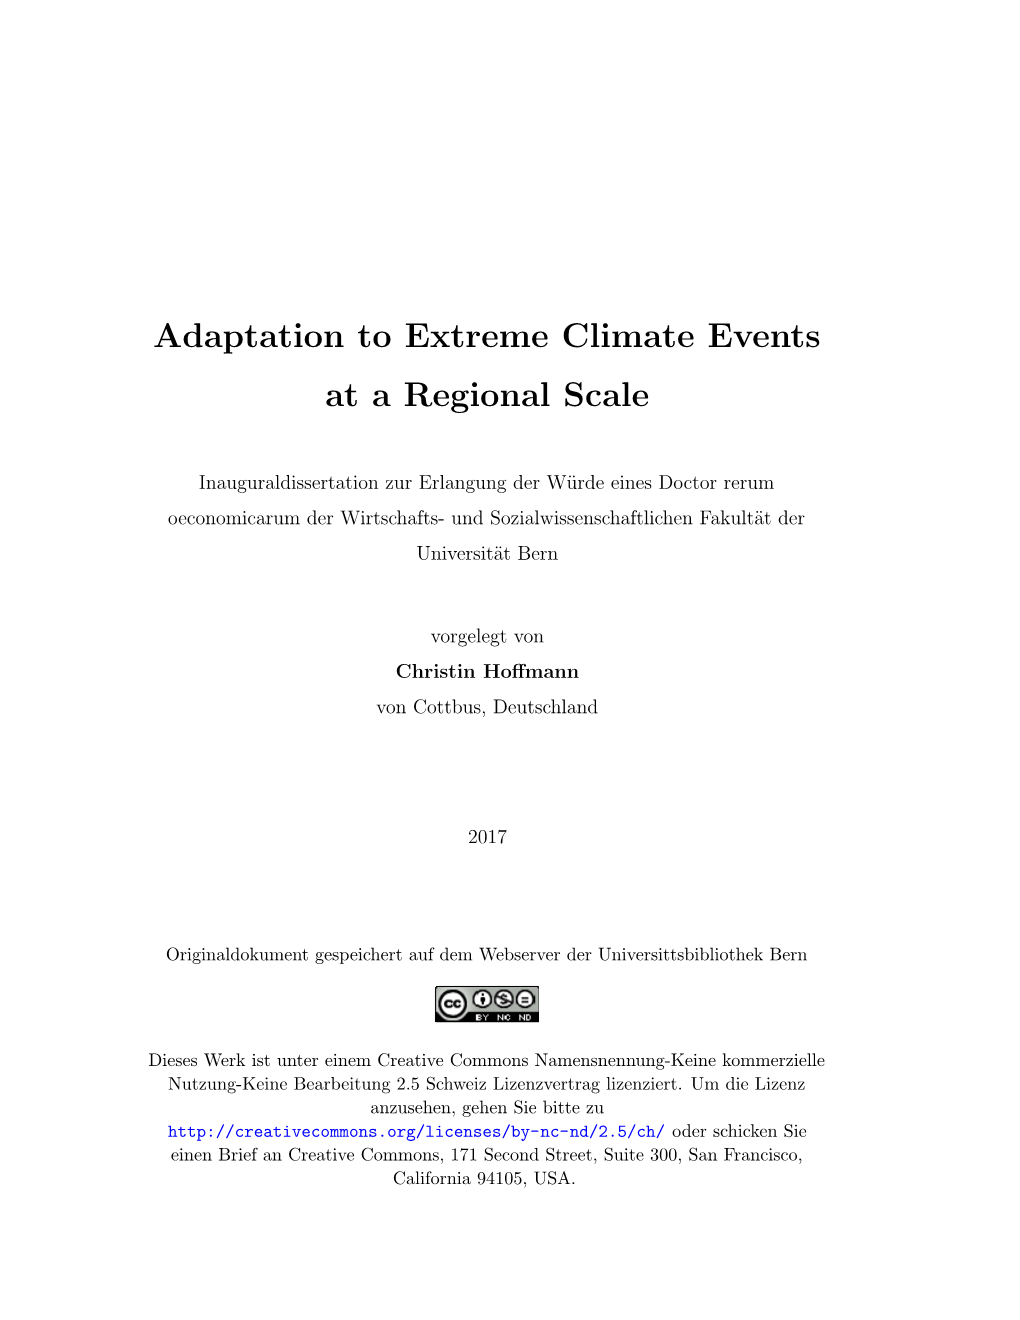 Adaptation to Extreme Climate Events at a Regional Scale